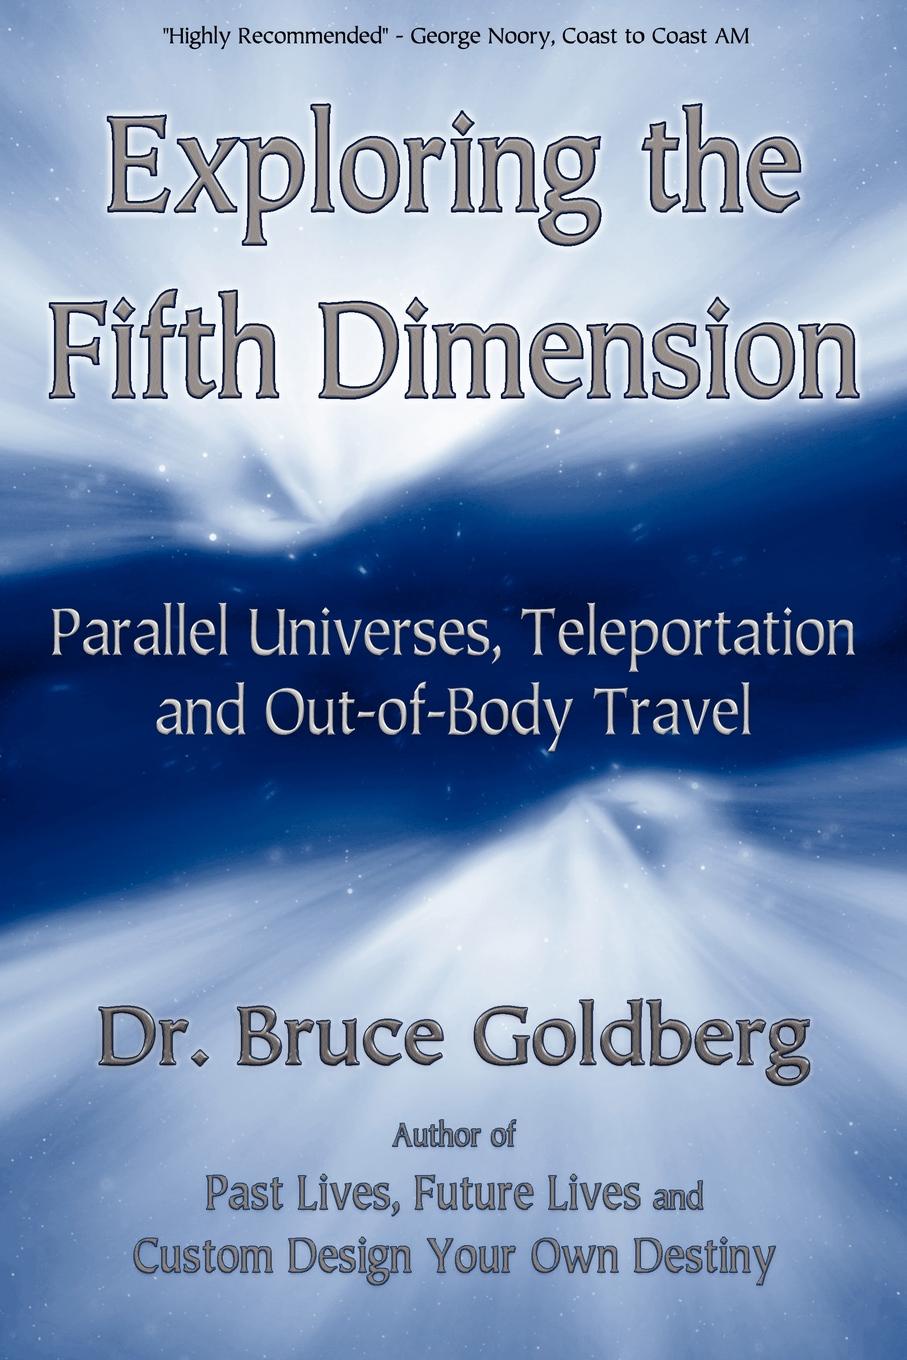 Exploring the Fifth Dimension. Parallel Universes, Teleportation and Out-of-Body Travel